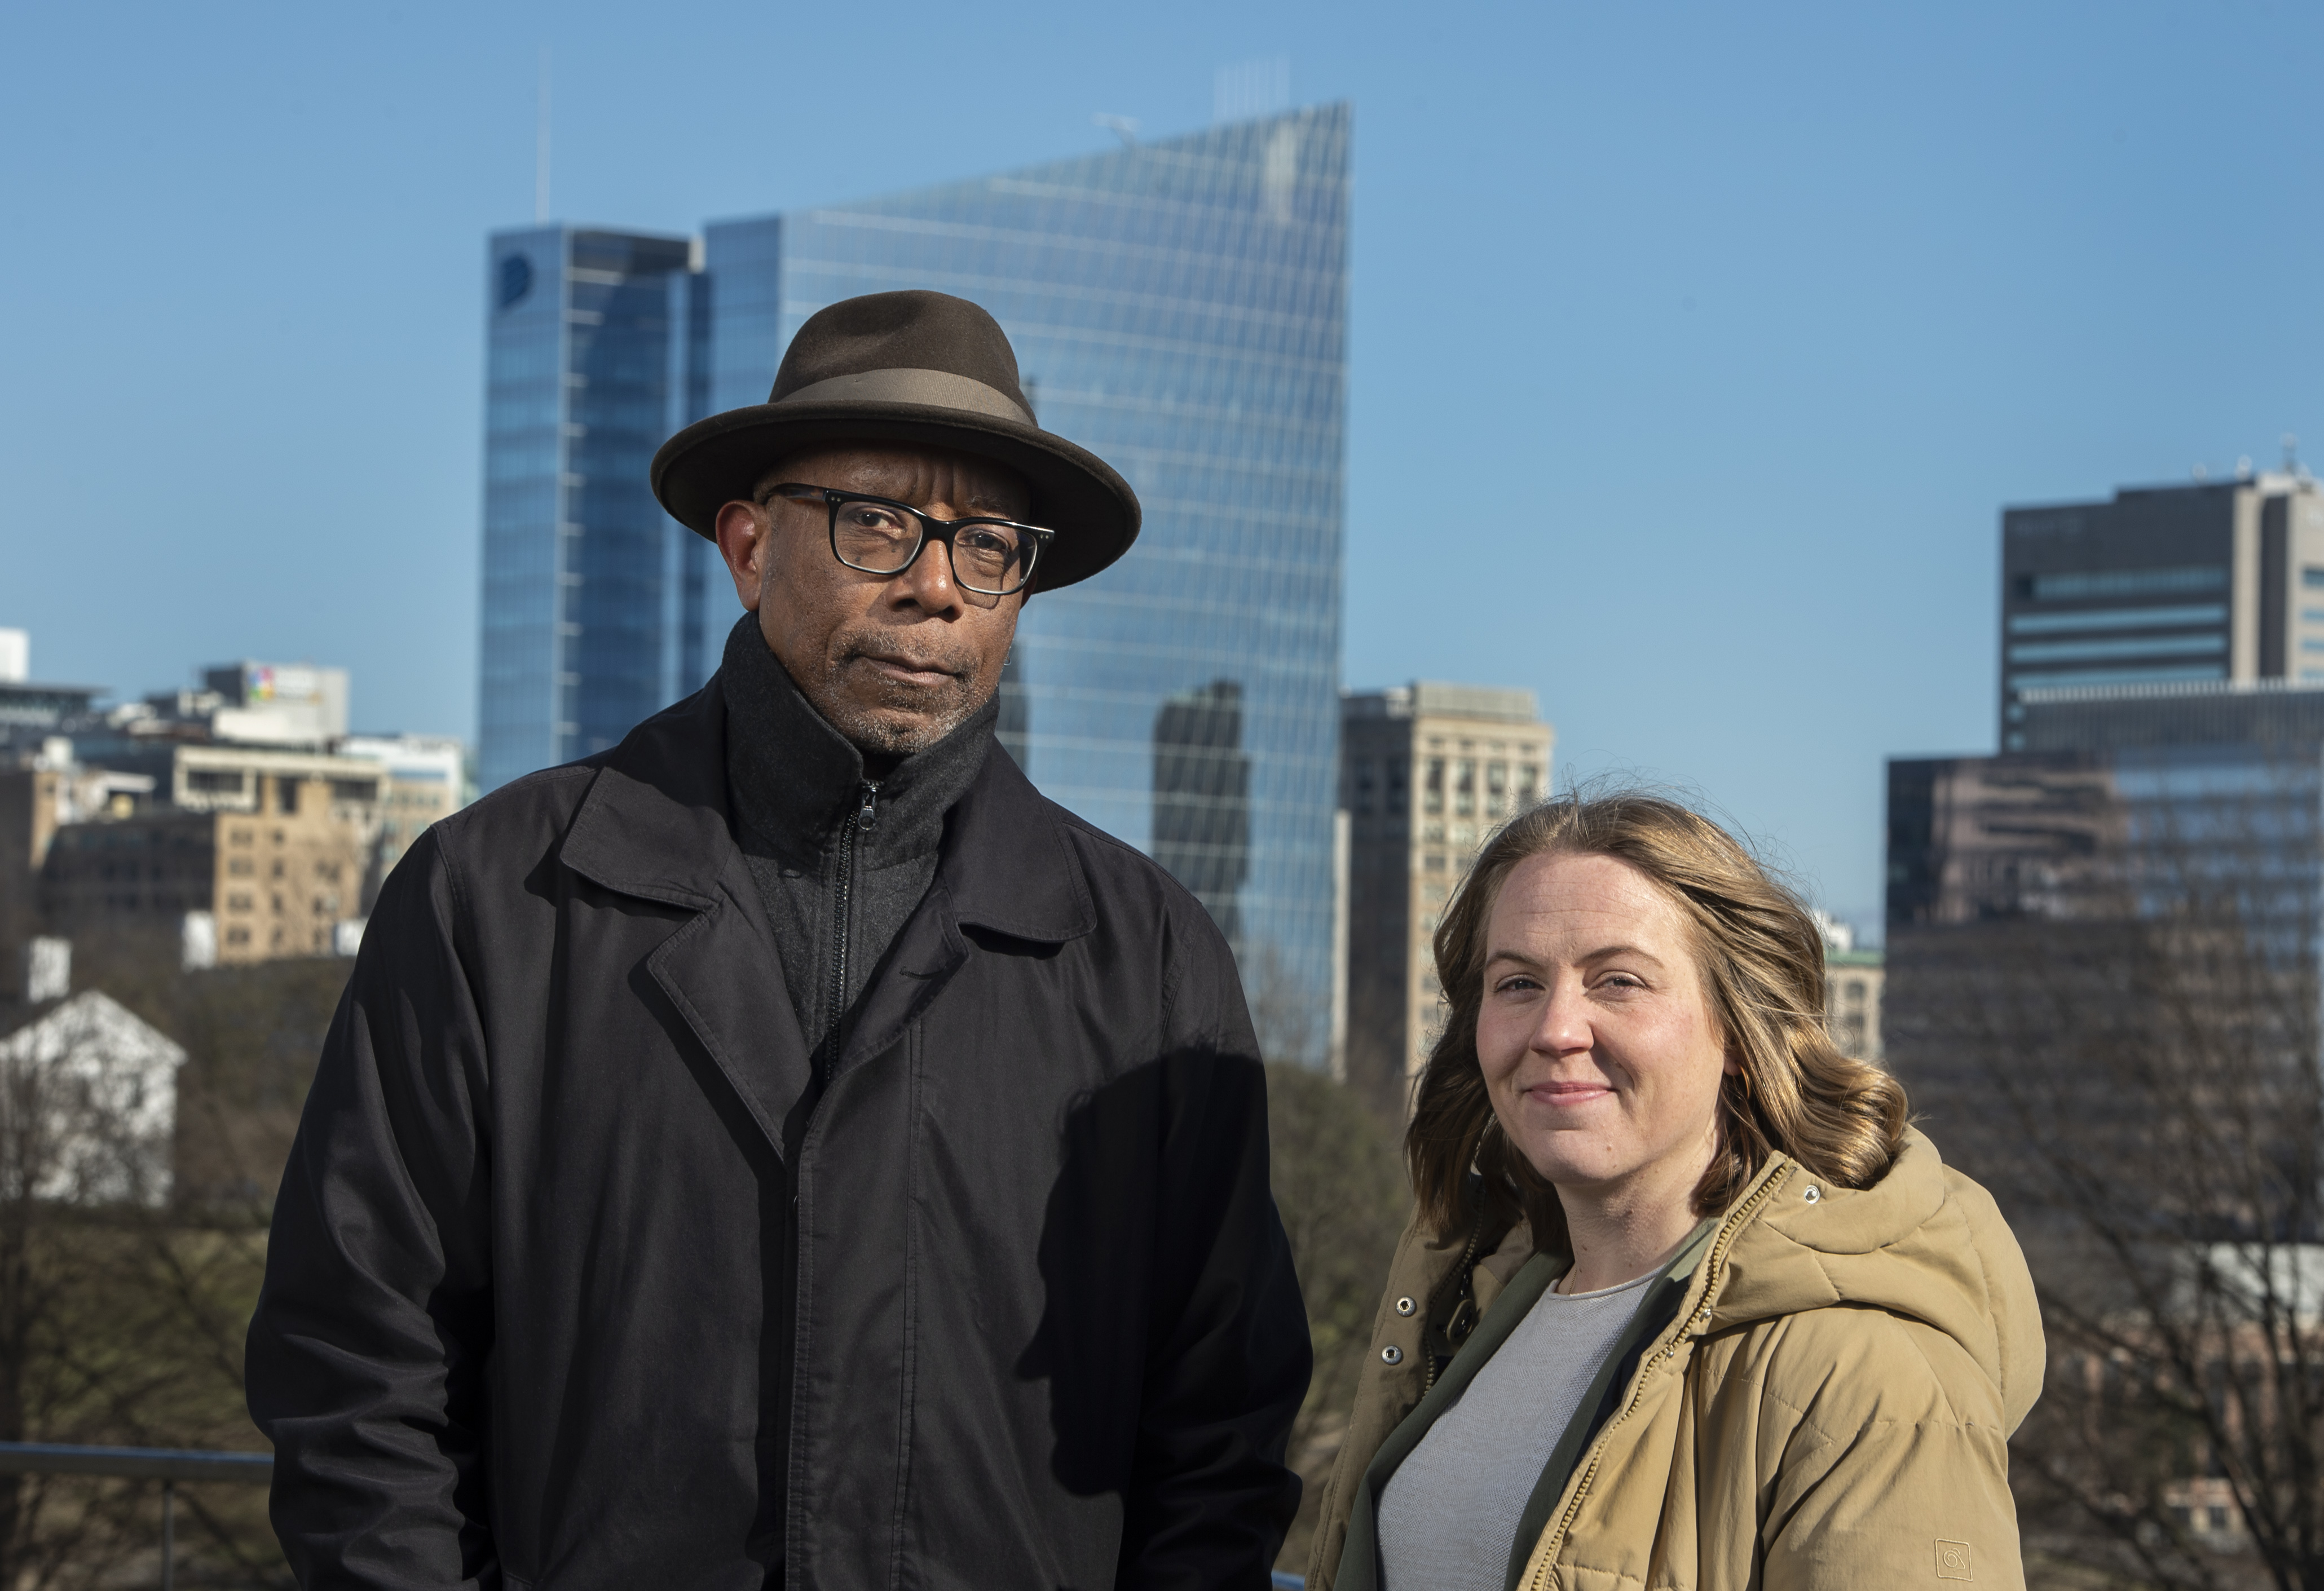 A man wearing a black pea coat and a rimmed hat stadning beside a woman in a light brown back and gray shirt. The Richmond skyline is in the background.